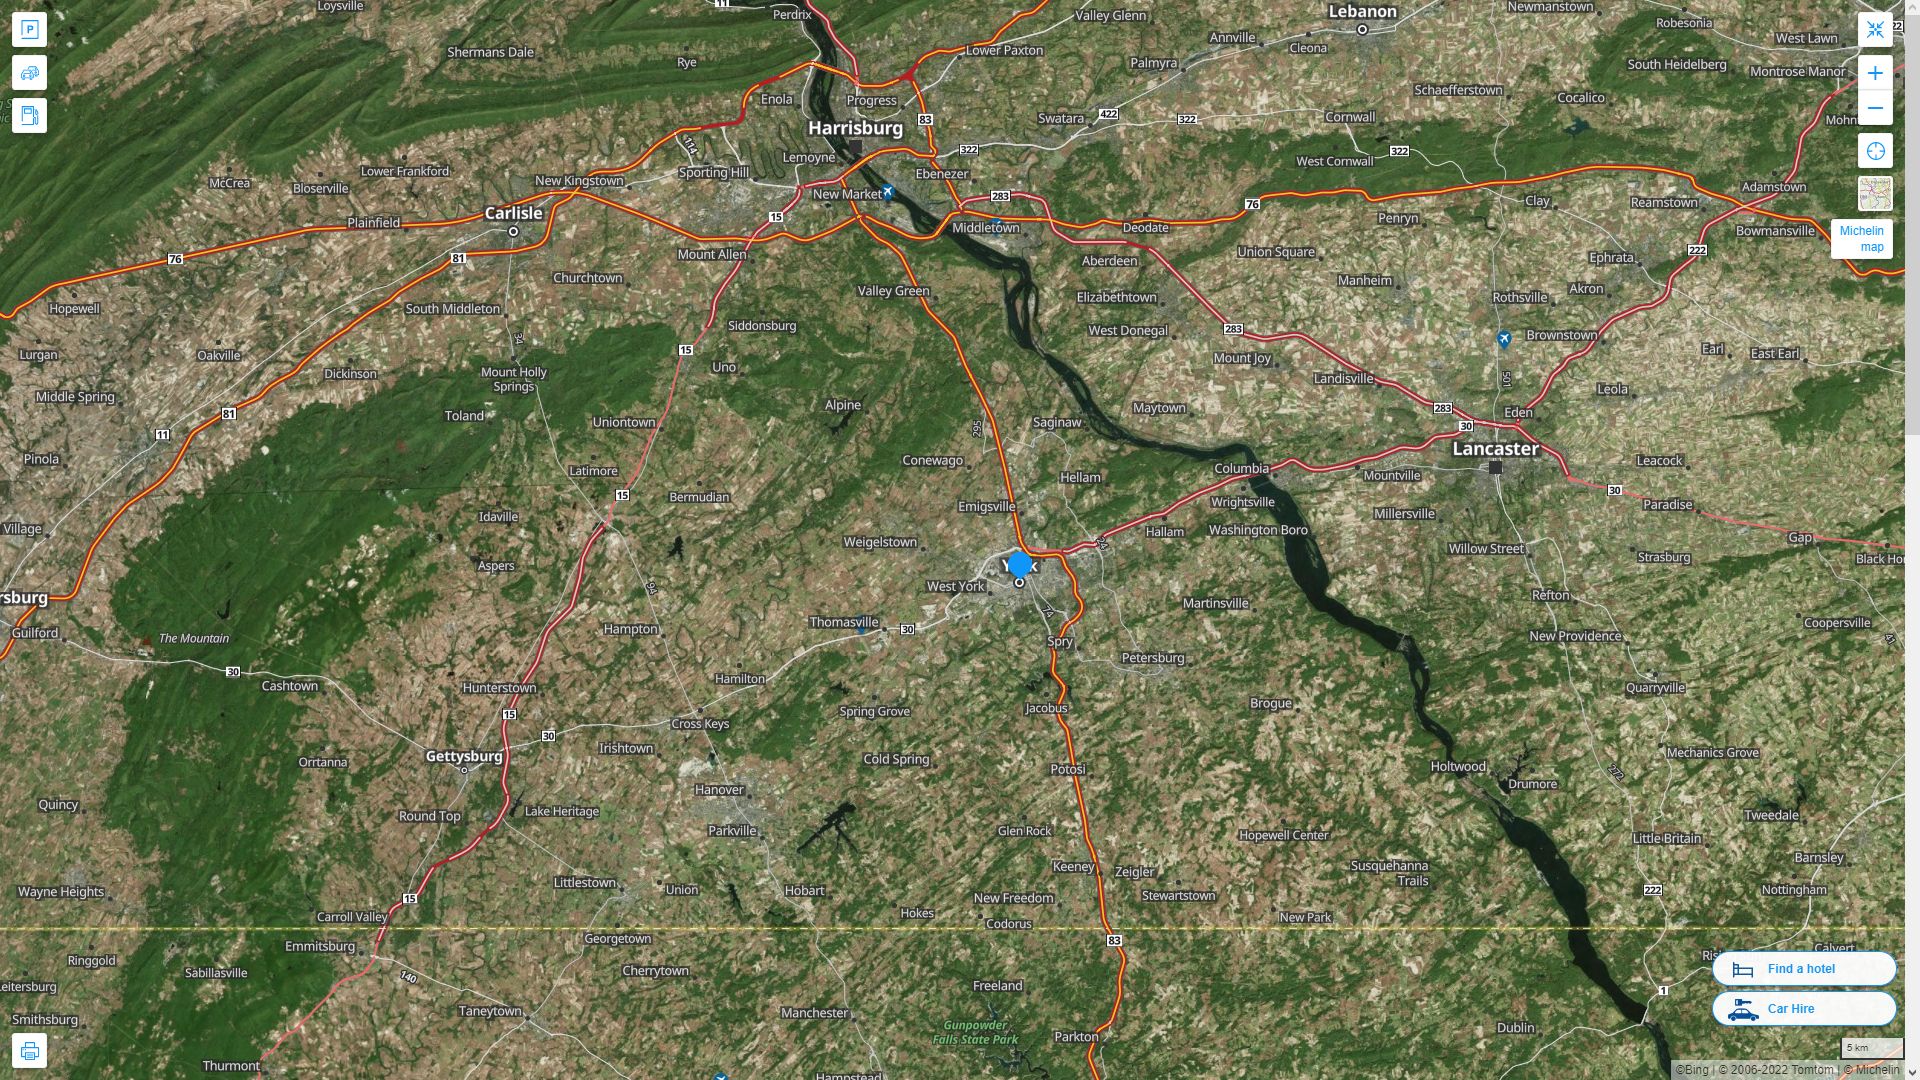 York Pennsylvania Highway and Road Map with Satellite View